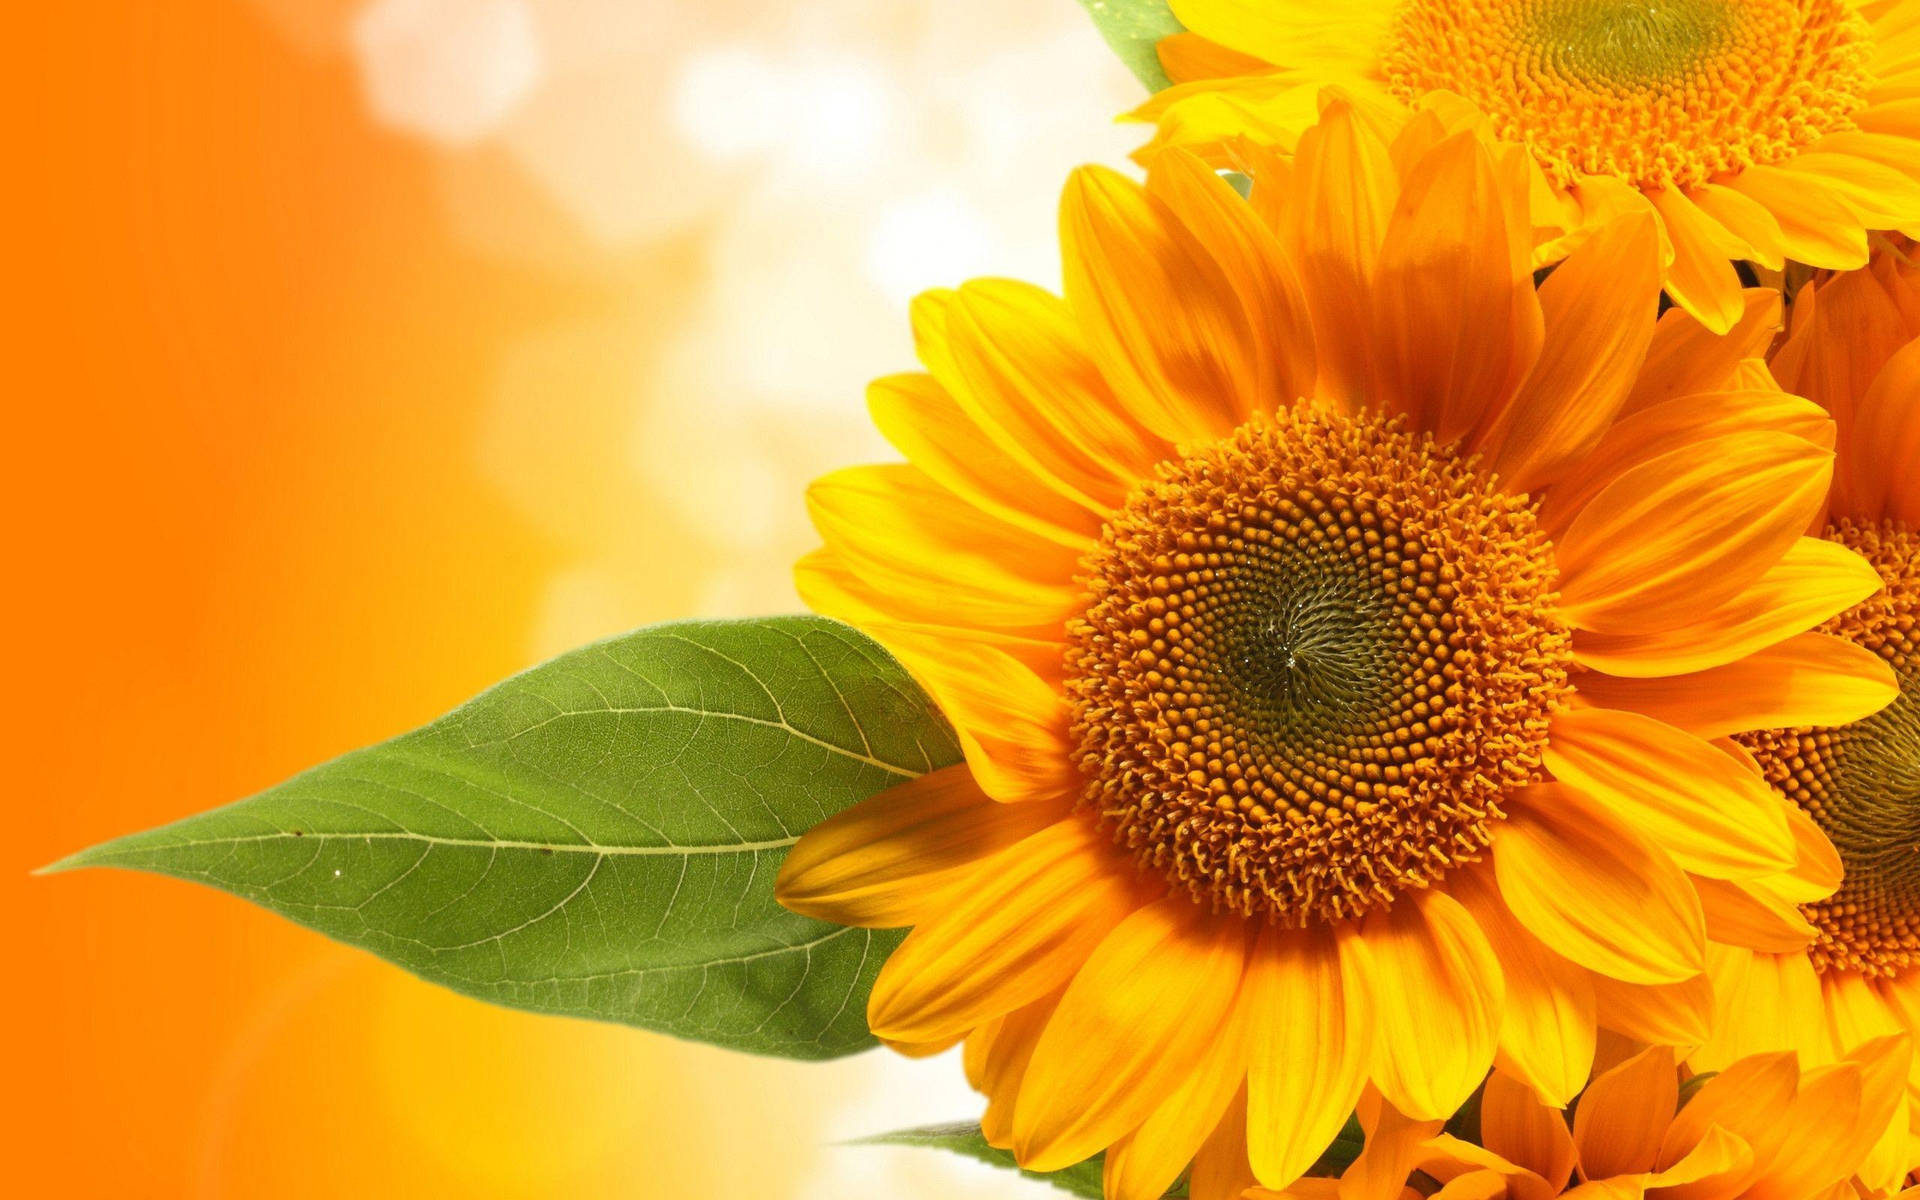 A bright yellow sunflower in a natural field, symbolizing hope and happiness. Wallpaper